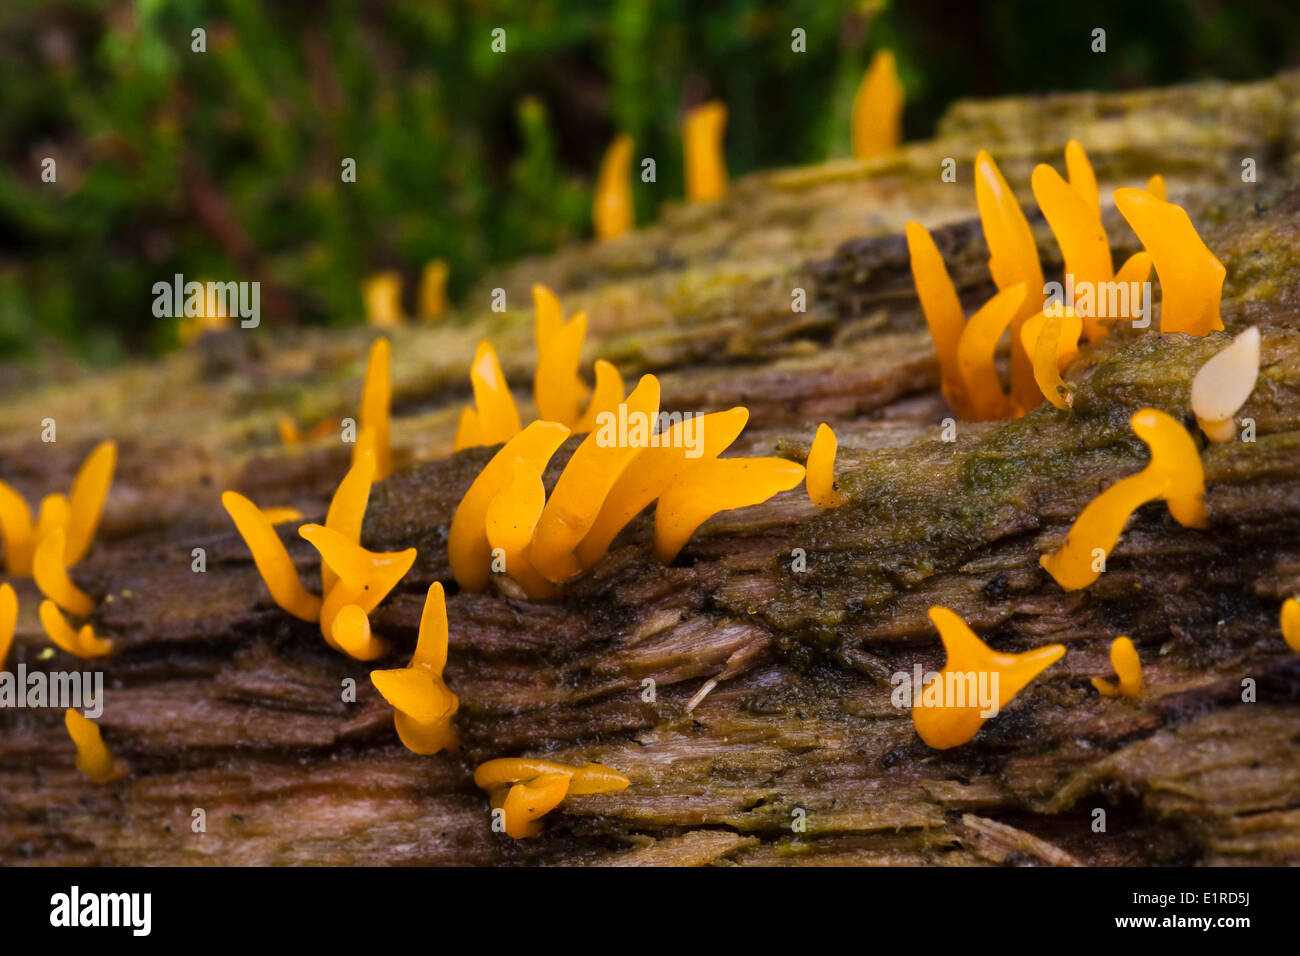 Small Stagshorn Fungus on decayed wood. Stock Photo